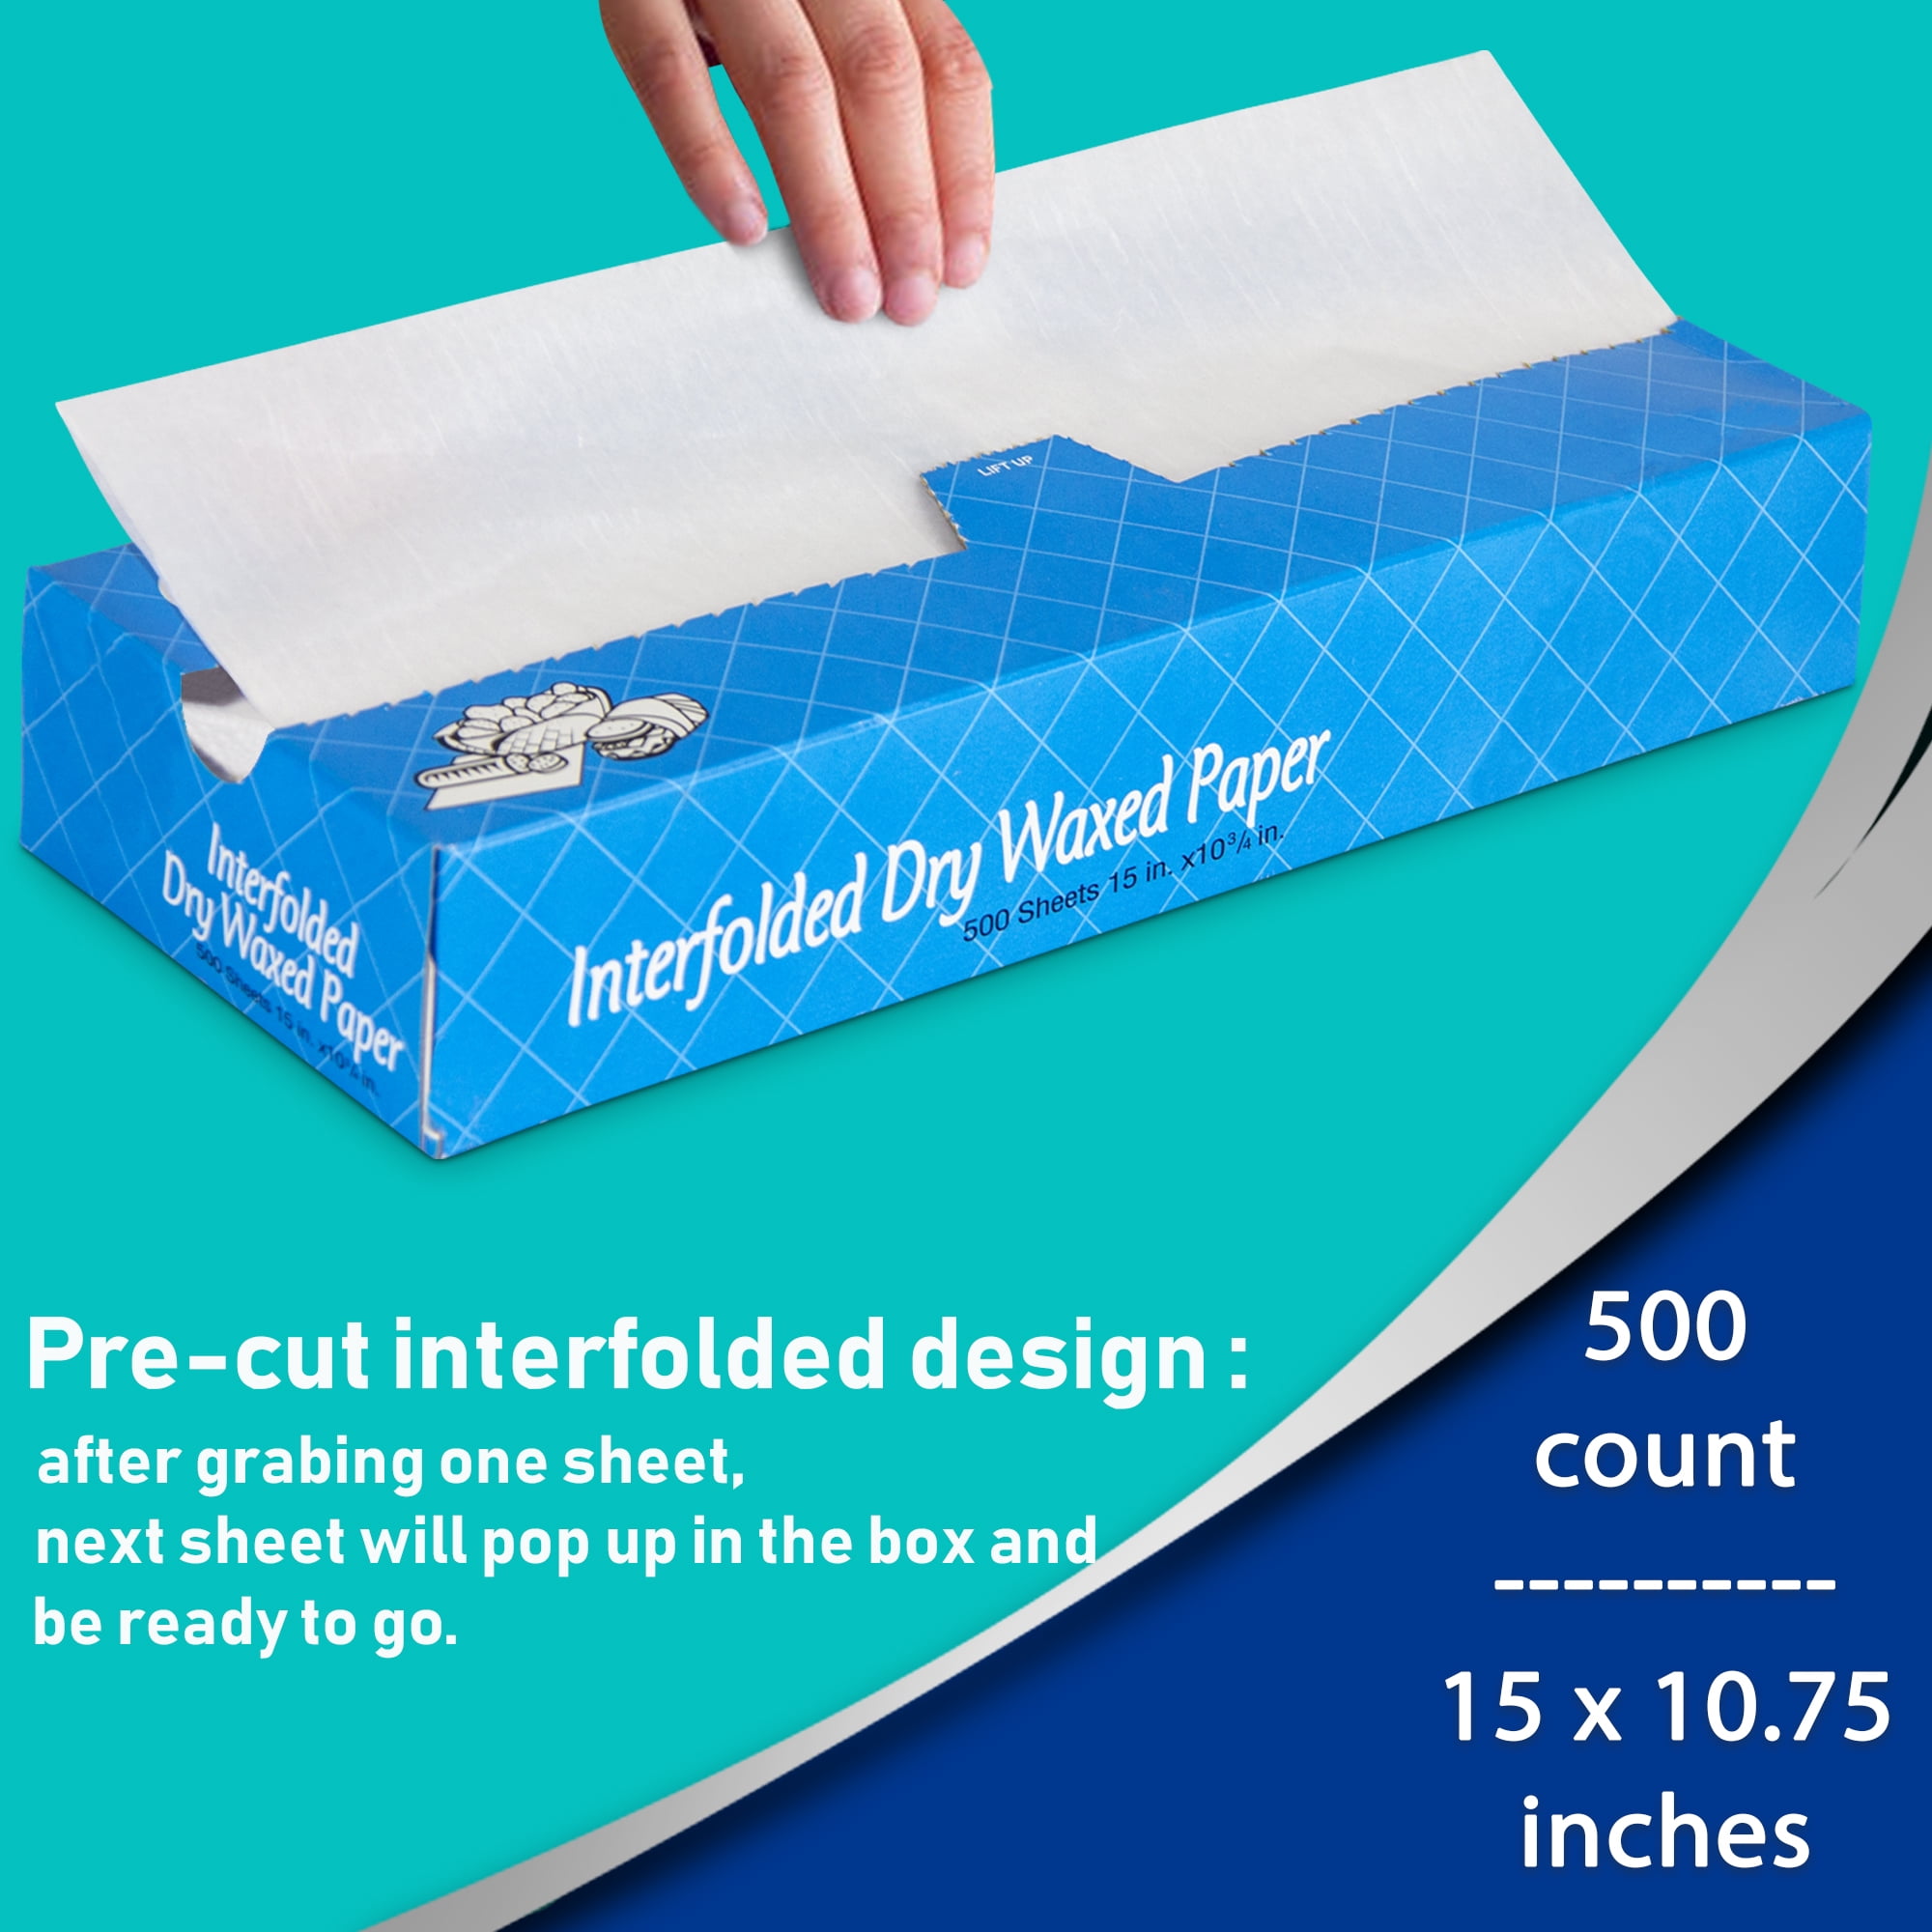 Fit Meal Prep [1000 Pack] 8 x 10.75 Wax Paper Sheets for Food, Interfolded  Precut Deli Paper, Pop Up Grease-Proof Sandwich Paper Wraps, Waterproof for  Lunch, Food Basket, Microwave Cover, BBQ 